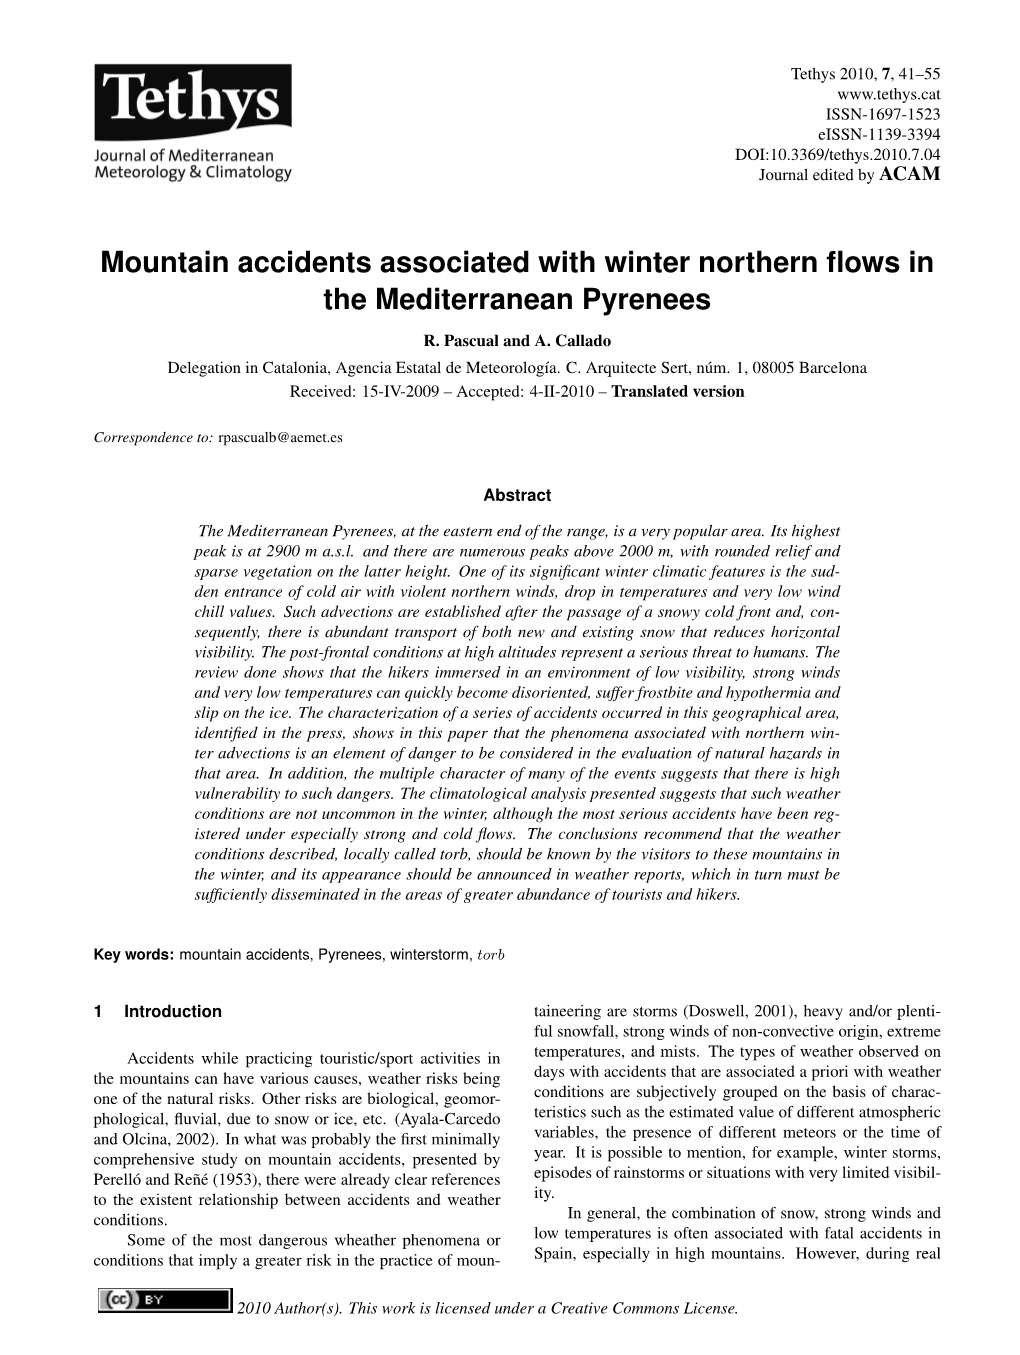 Mountain Accidents Associated with Winter Northern Flows in the Mediterranean Pyrenees